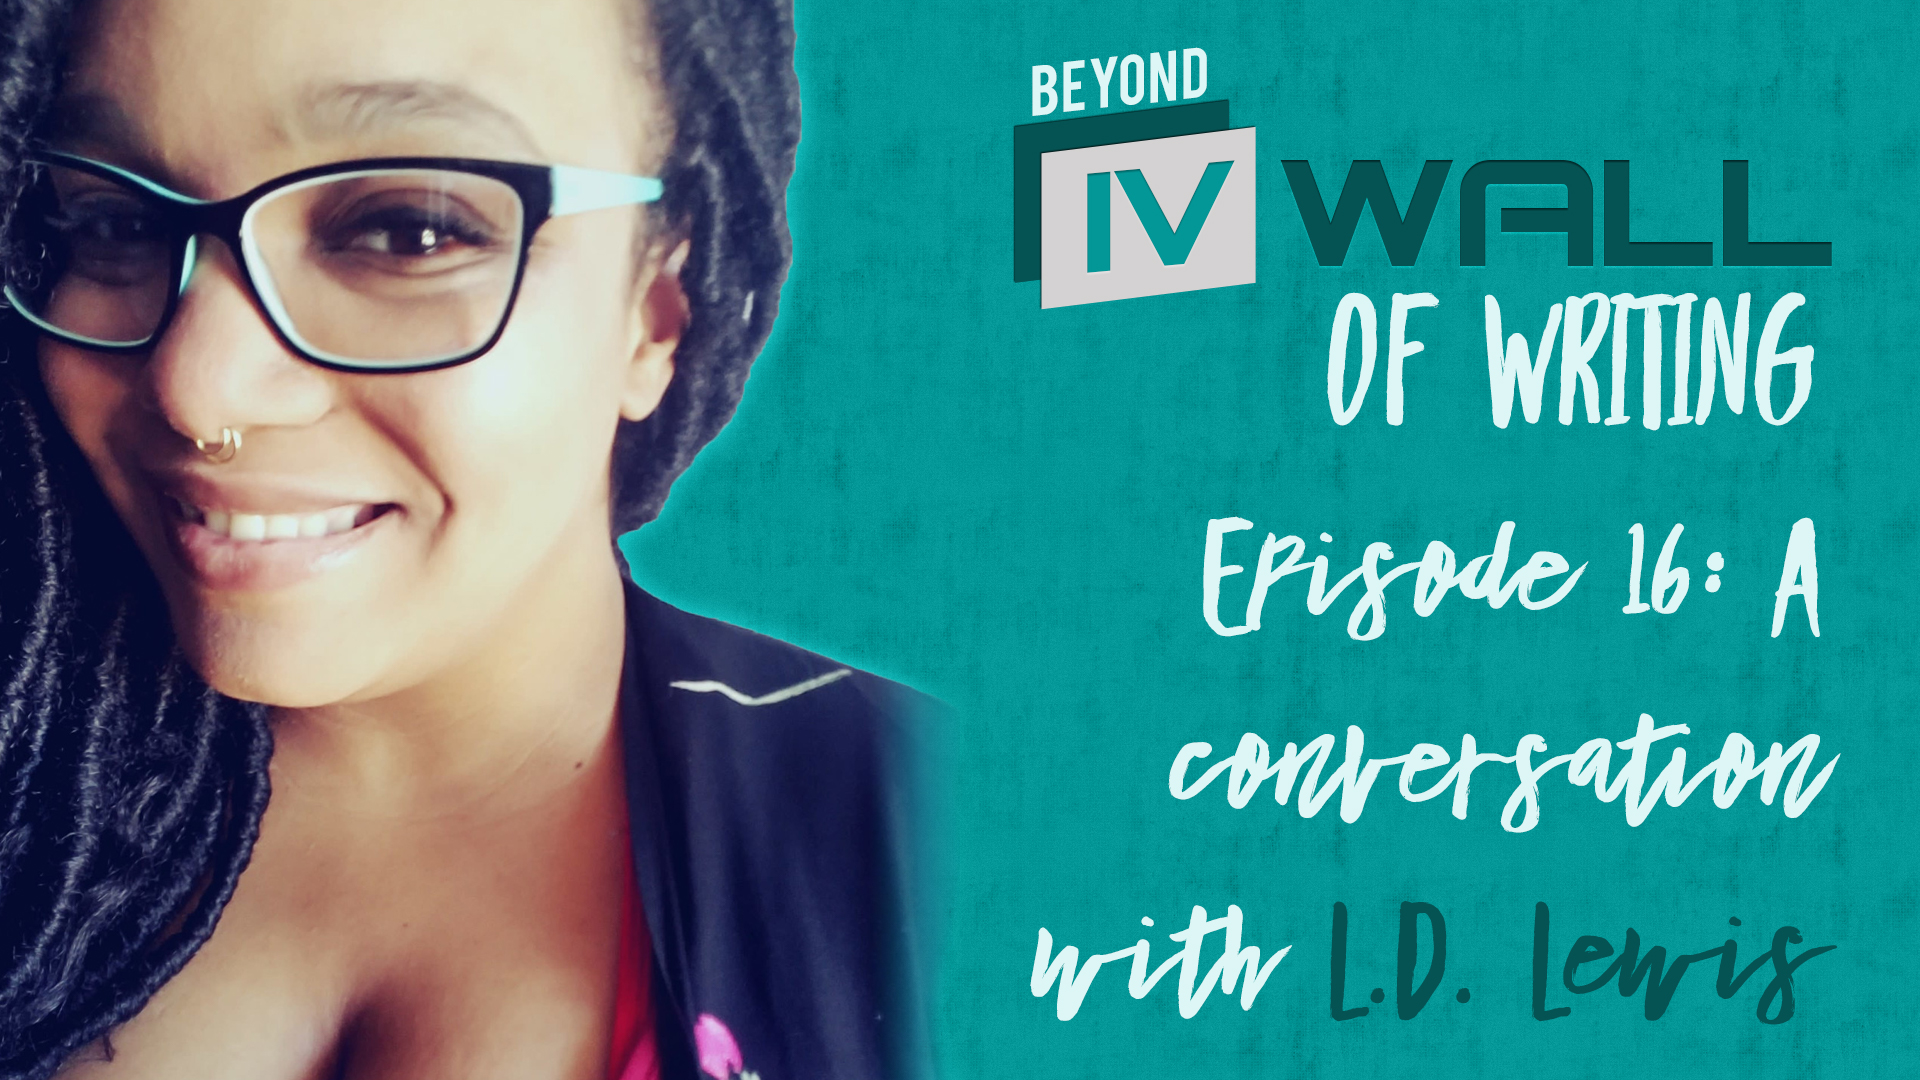 Beyond the IVWall of Writing Episode 16- A Conversation with L.D. Lewis